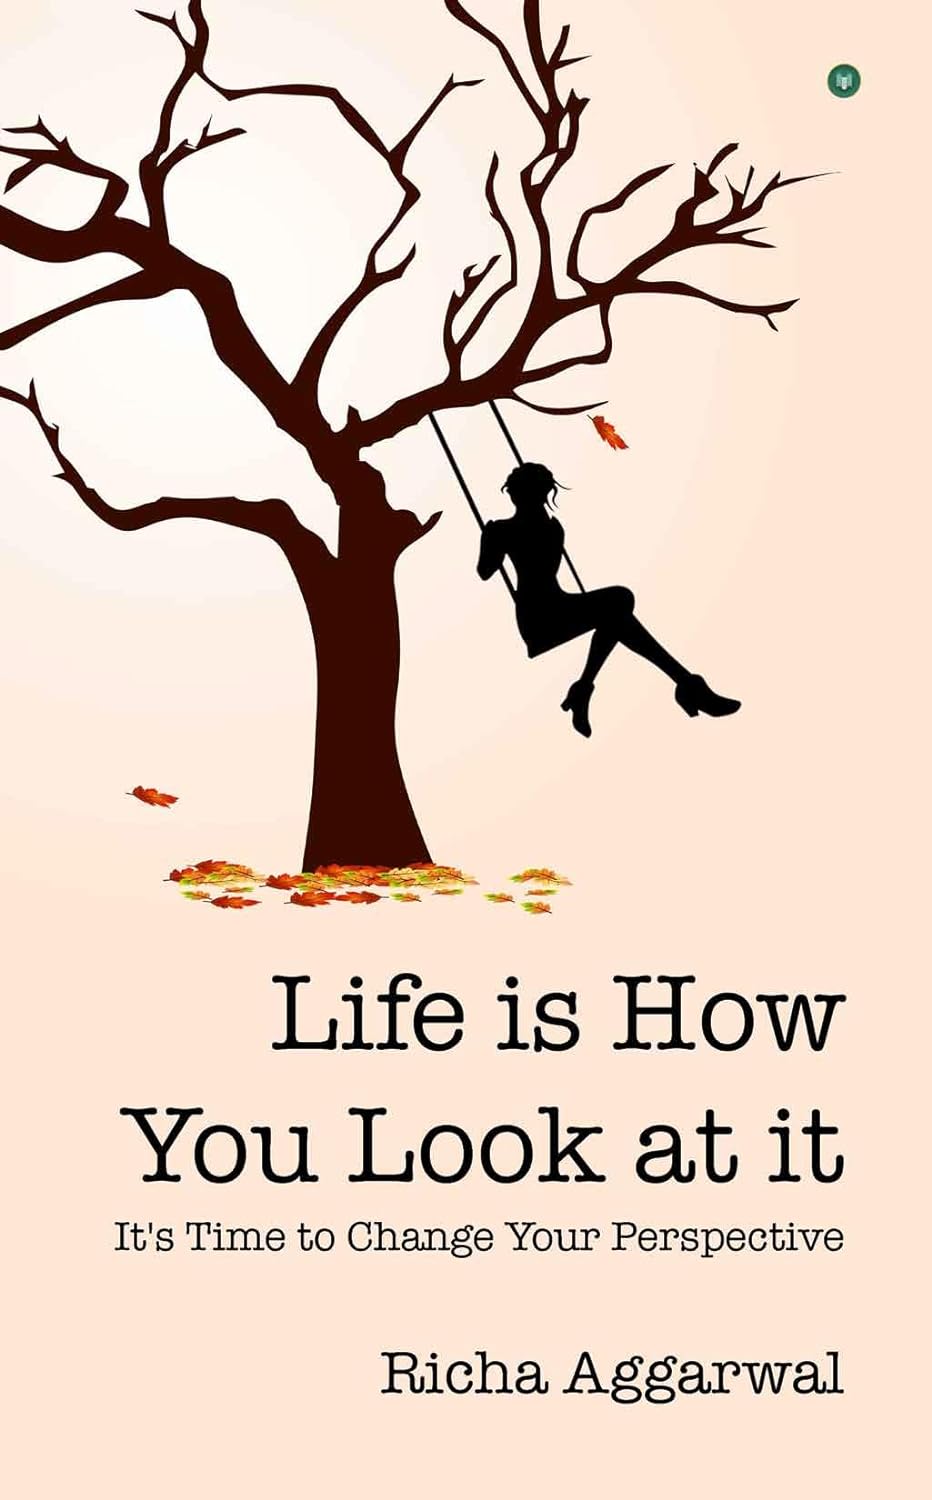 Life is How You Look at it by Richa Aggarwal